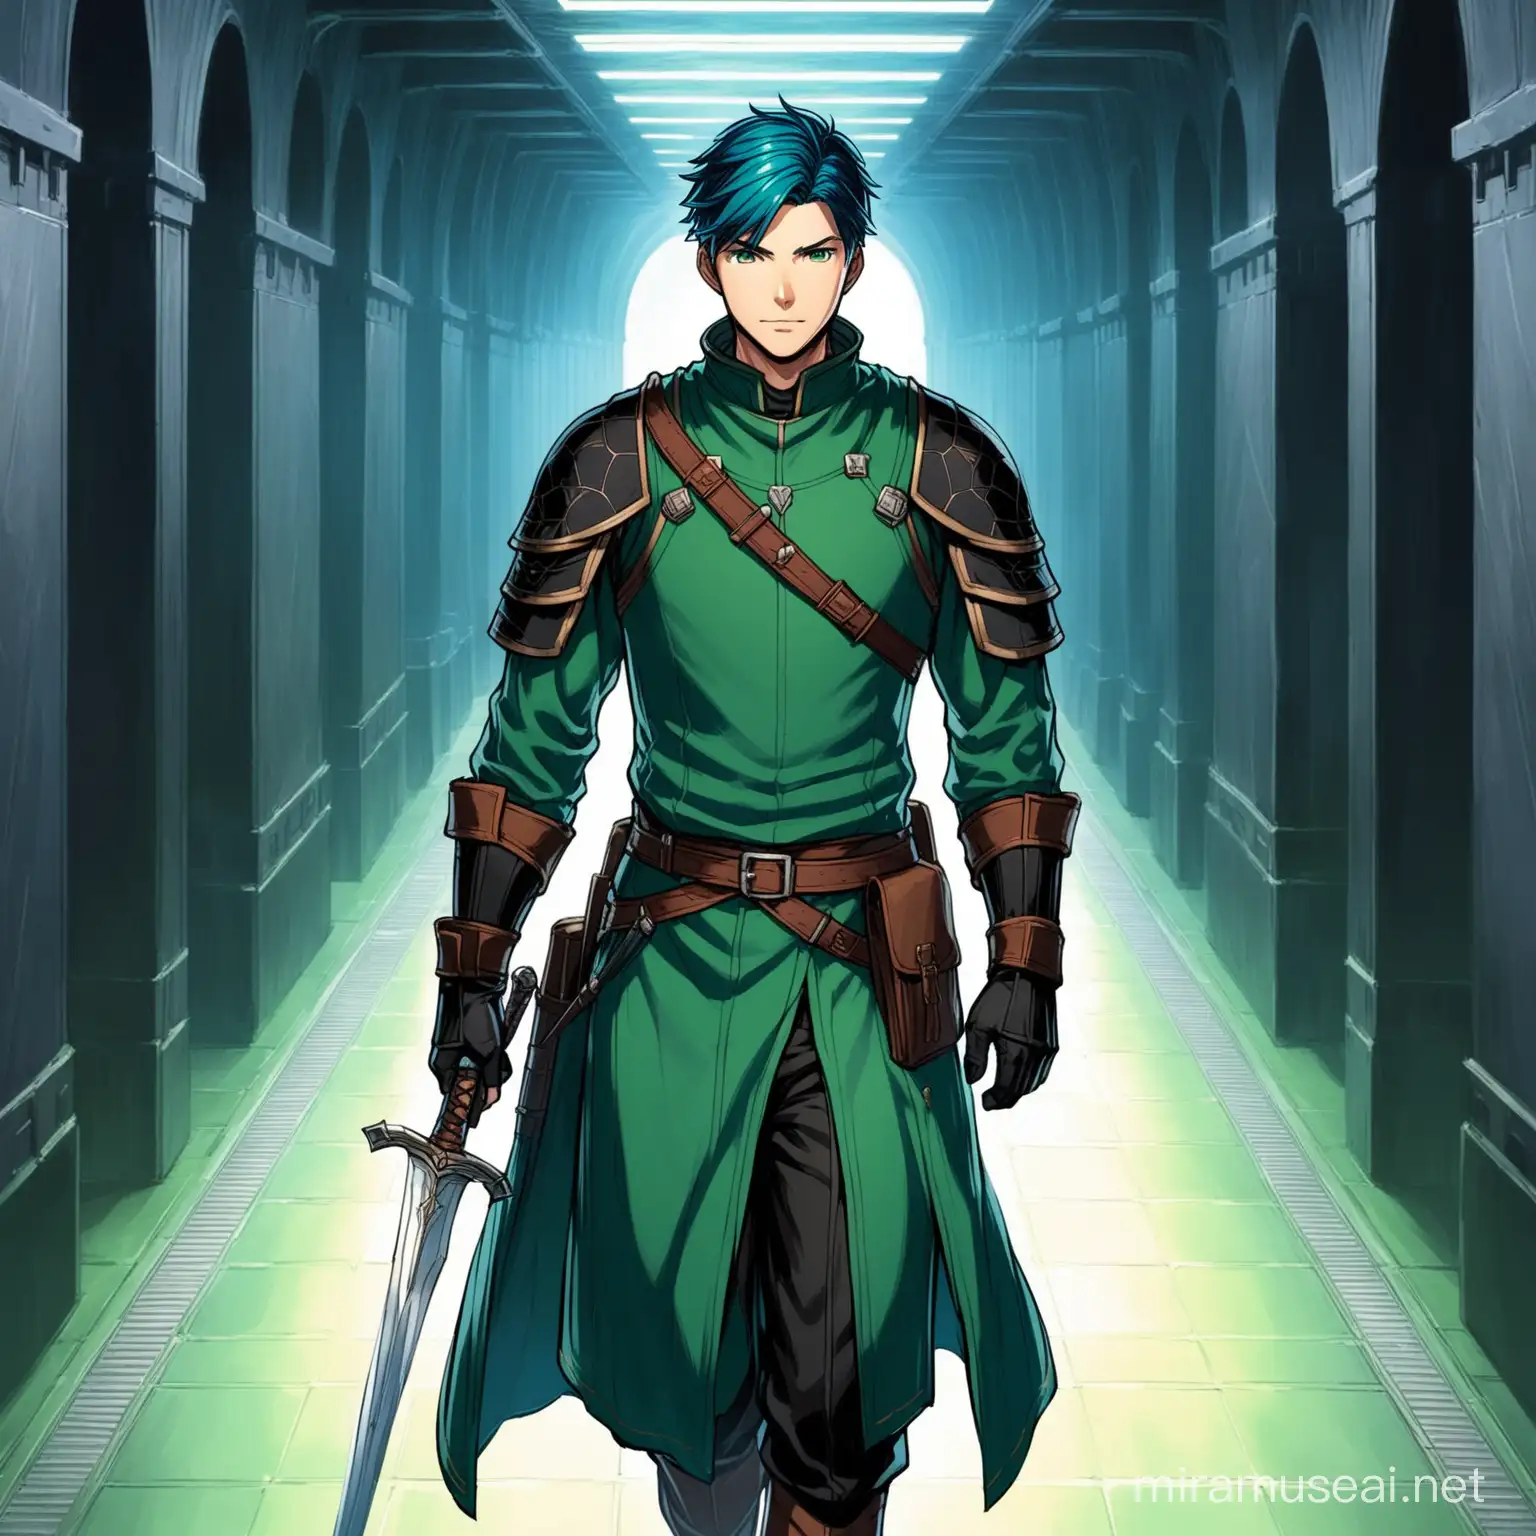 human male, he has a wild and short cut hairstyle like Ike from Fire Emblem, his hair is black, he is clean shaved, his eyes are aqua colored, he wears clothes like the witcher, his clothes are dark green and black, he has two longswords sheathed on his back, he is walking through the halls of a galactic colony.